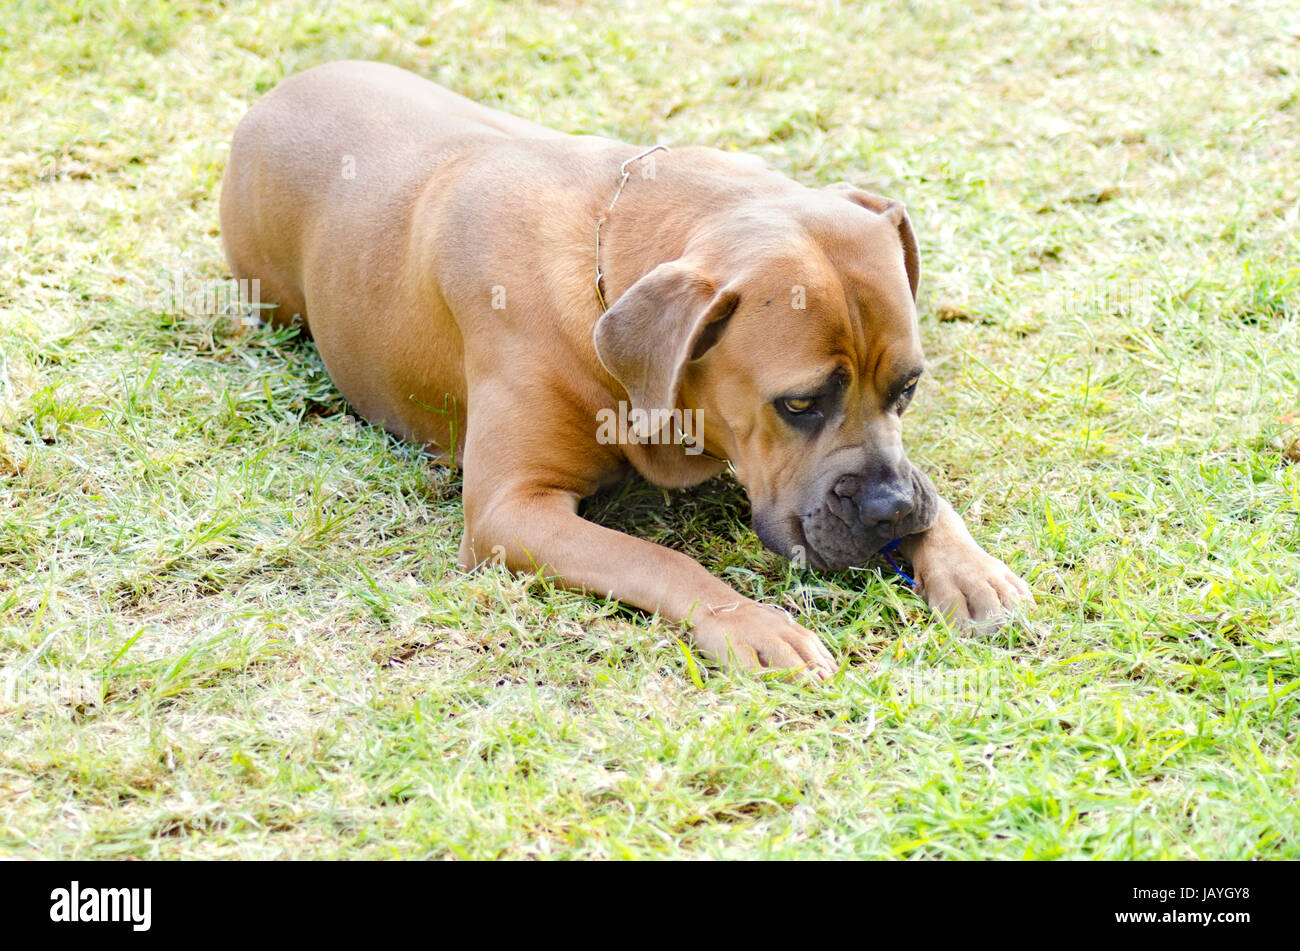 A young, beautiful gray medium sized Cane Corso dog with uncropped ears sitting on the grass. The Italian Mastiff is a powerfully built animal with great intelligence and a willingness to please. Stock Photo